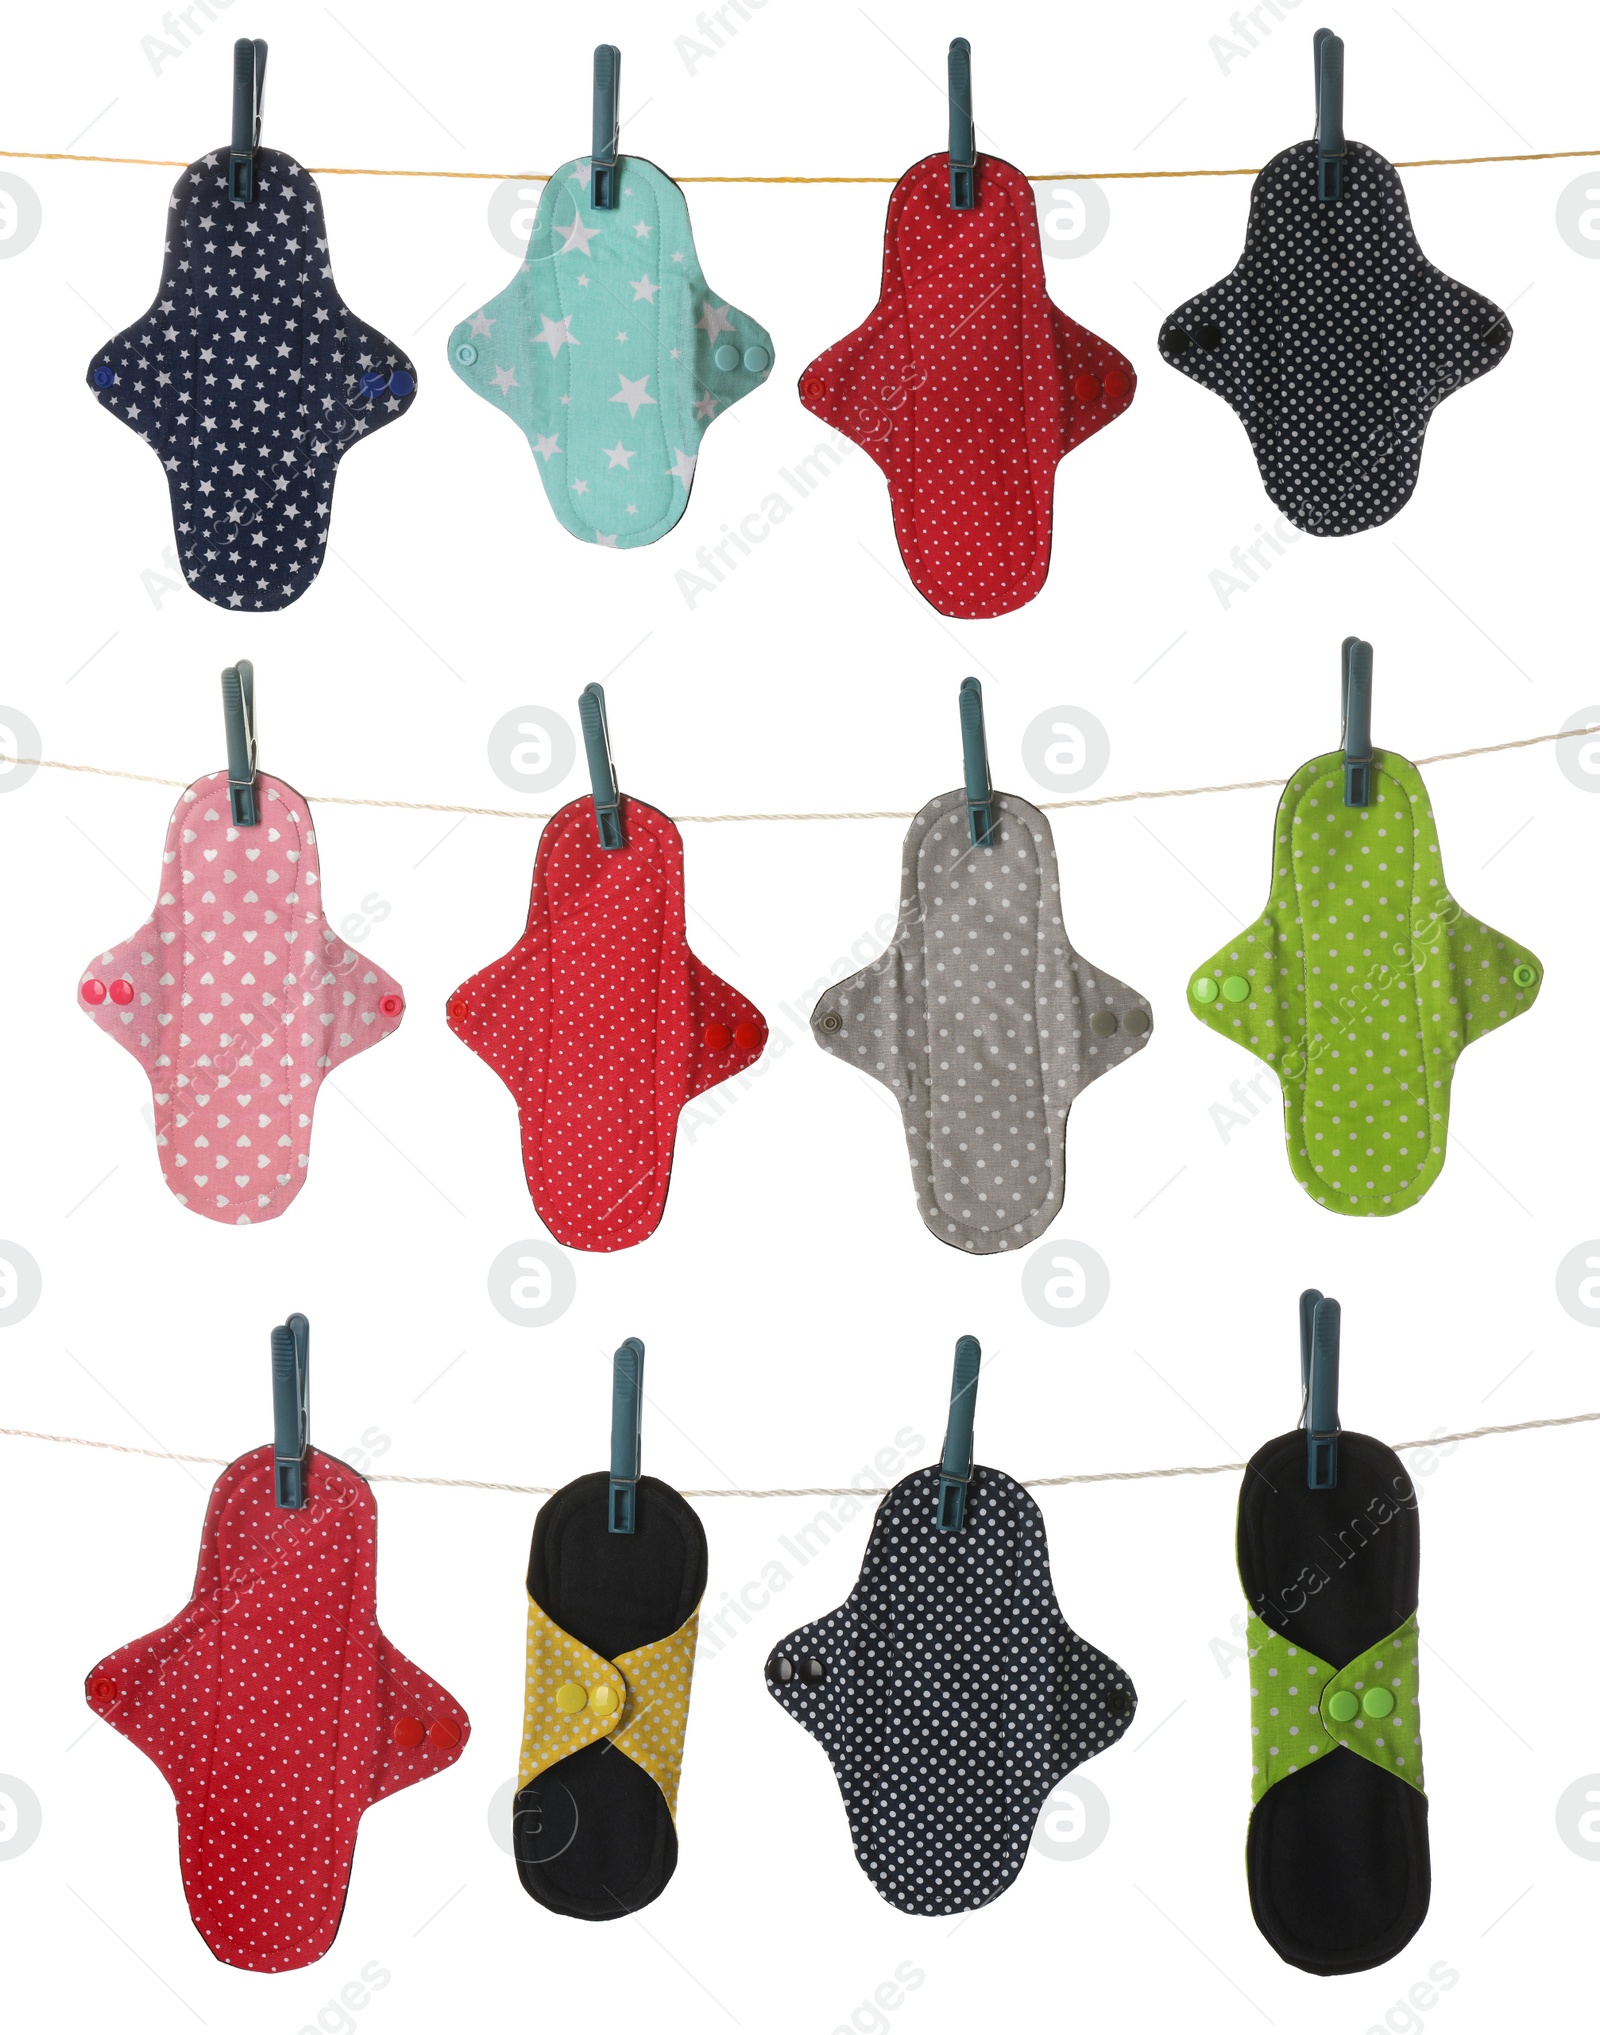 Image of Many different cloth menstrual pads hanging on laundry line, white background